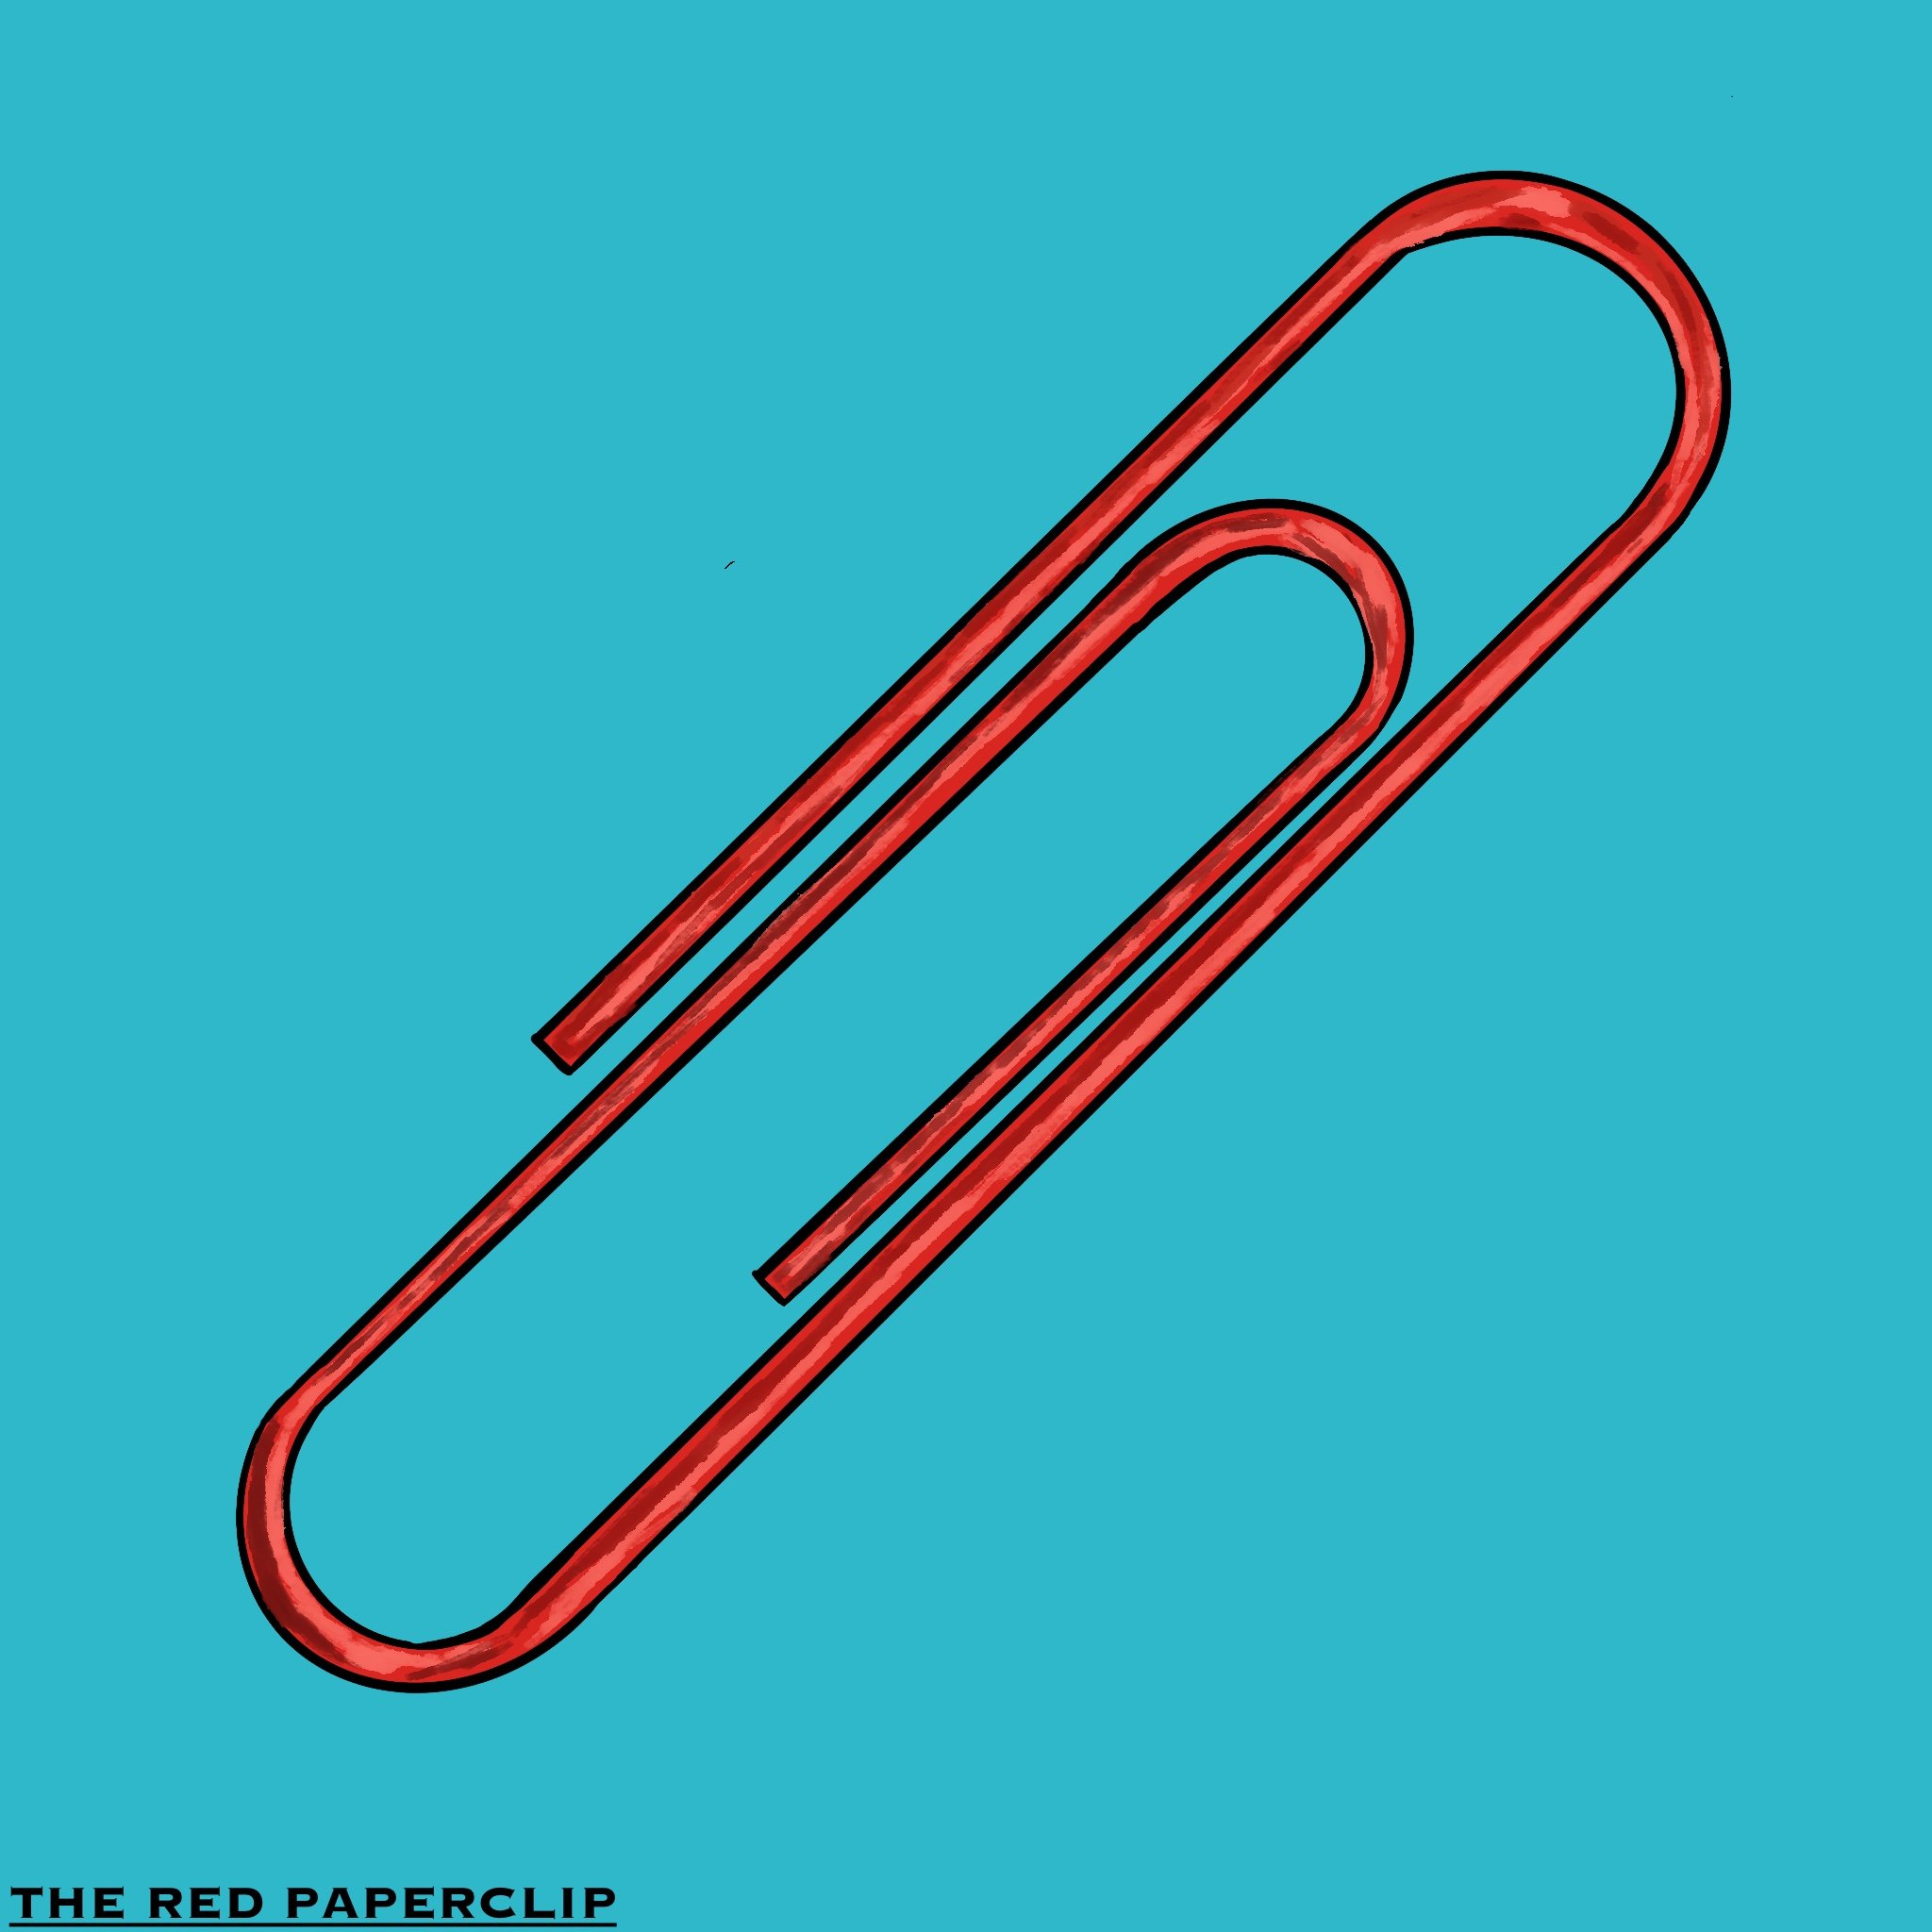 hærge Terapi Downtown Corrosive (💙,🧡) toilet.lens 🚽 (🌸, 🌿) on Twitter: "MY RED PAPERCLIP  TRADING EXPERIMENT A 🧵 440 days ago i created this Red Paperclip NFT.  Inspired by the real life version where Kyle